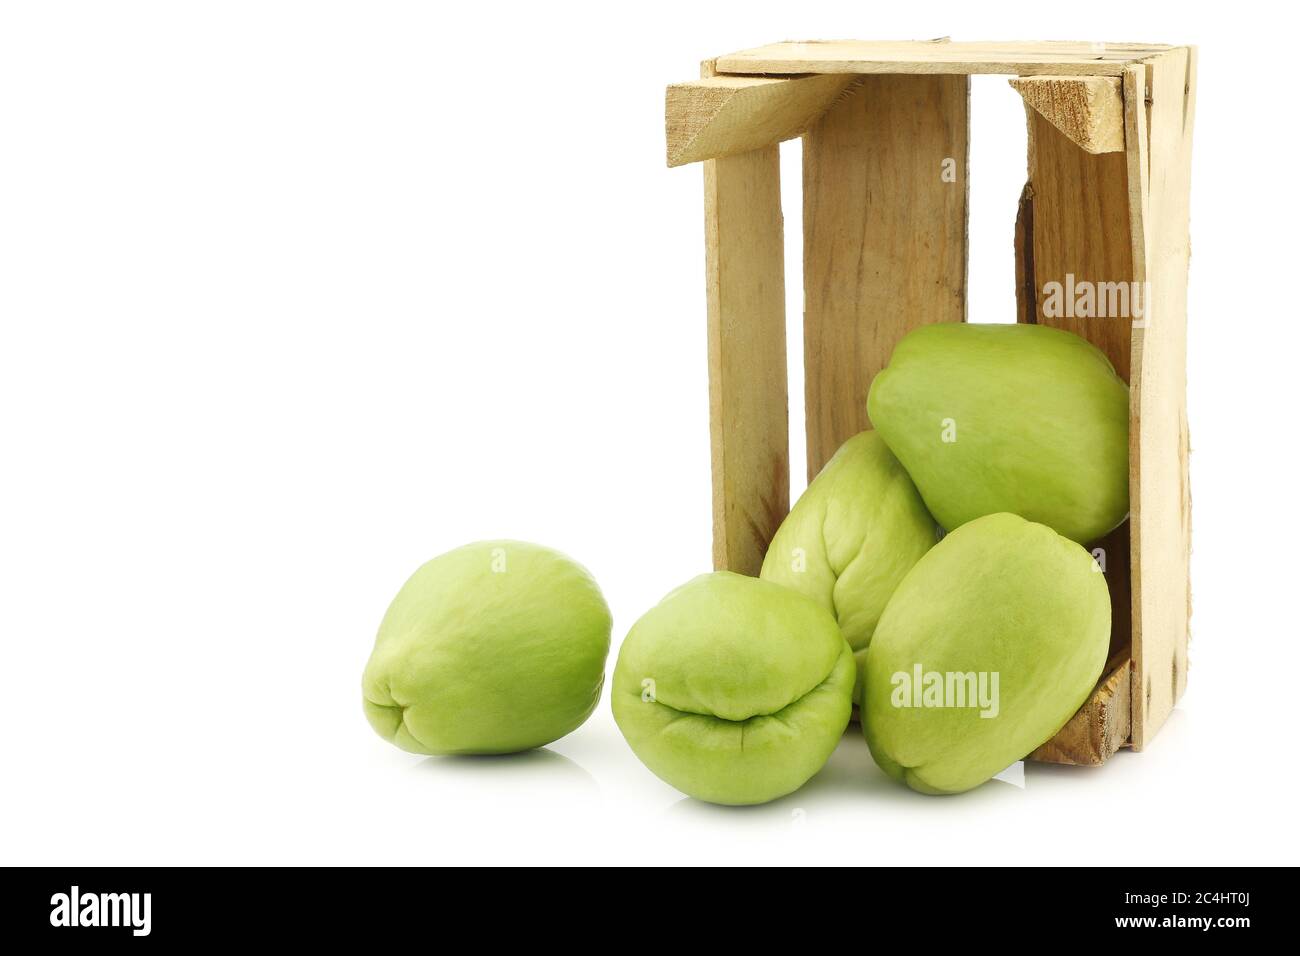 Chayote fruit (Sechium edulis)and a cut one in a wooden crate on a white background Stock Photo